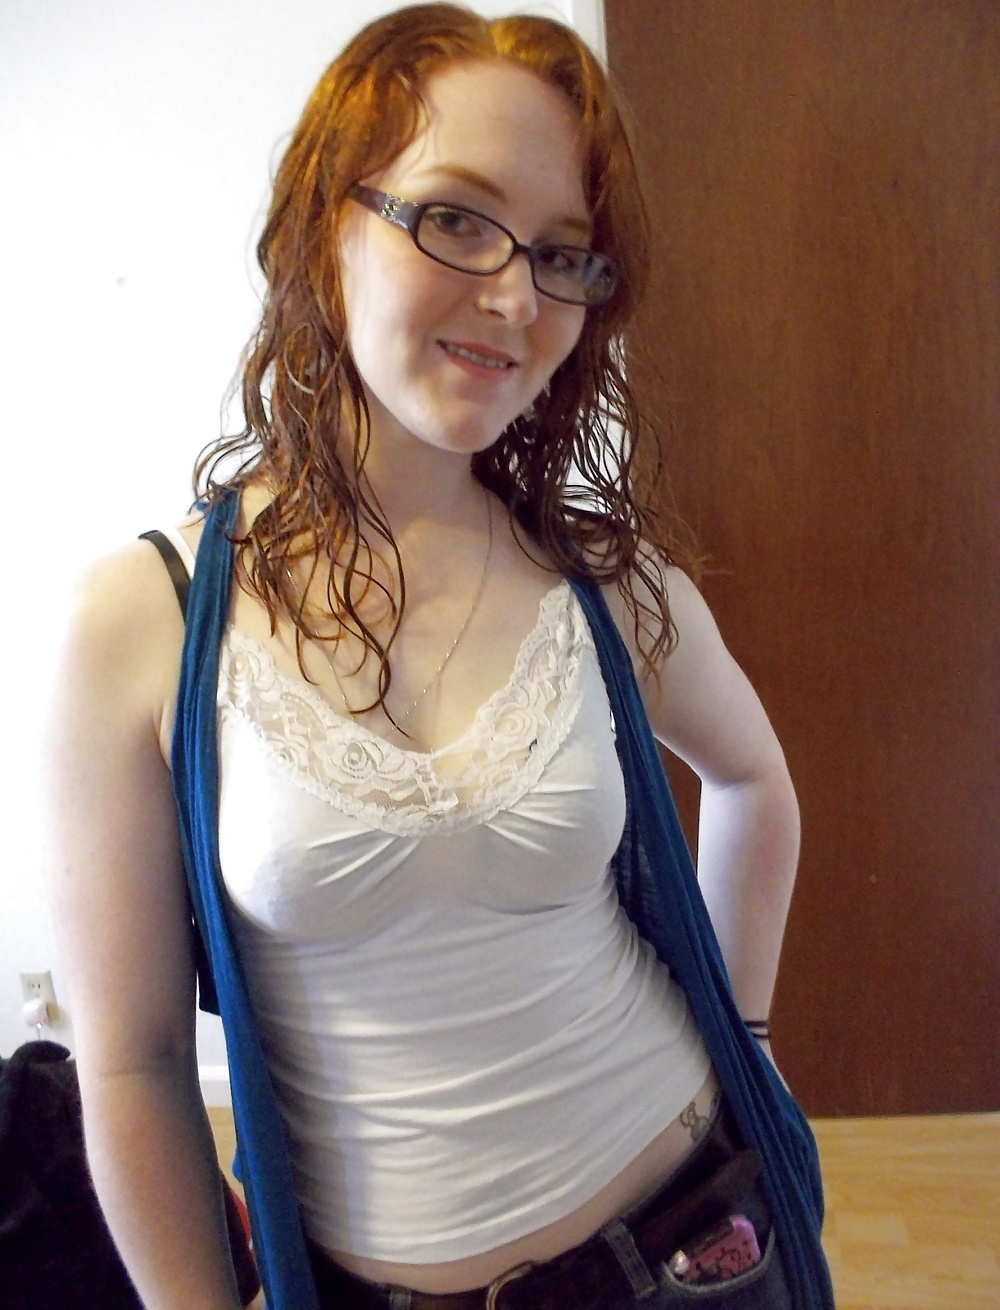 Hot redhead teen for your pleasure #40827068